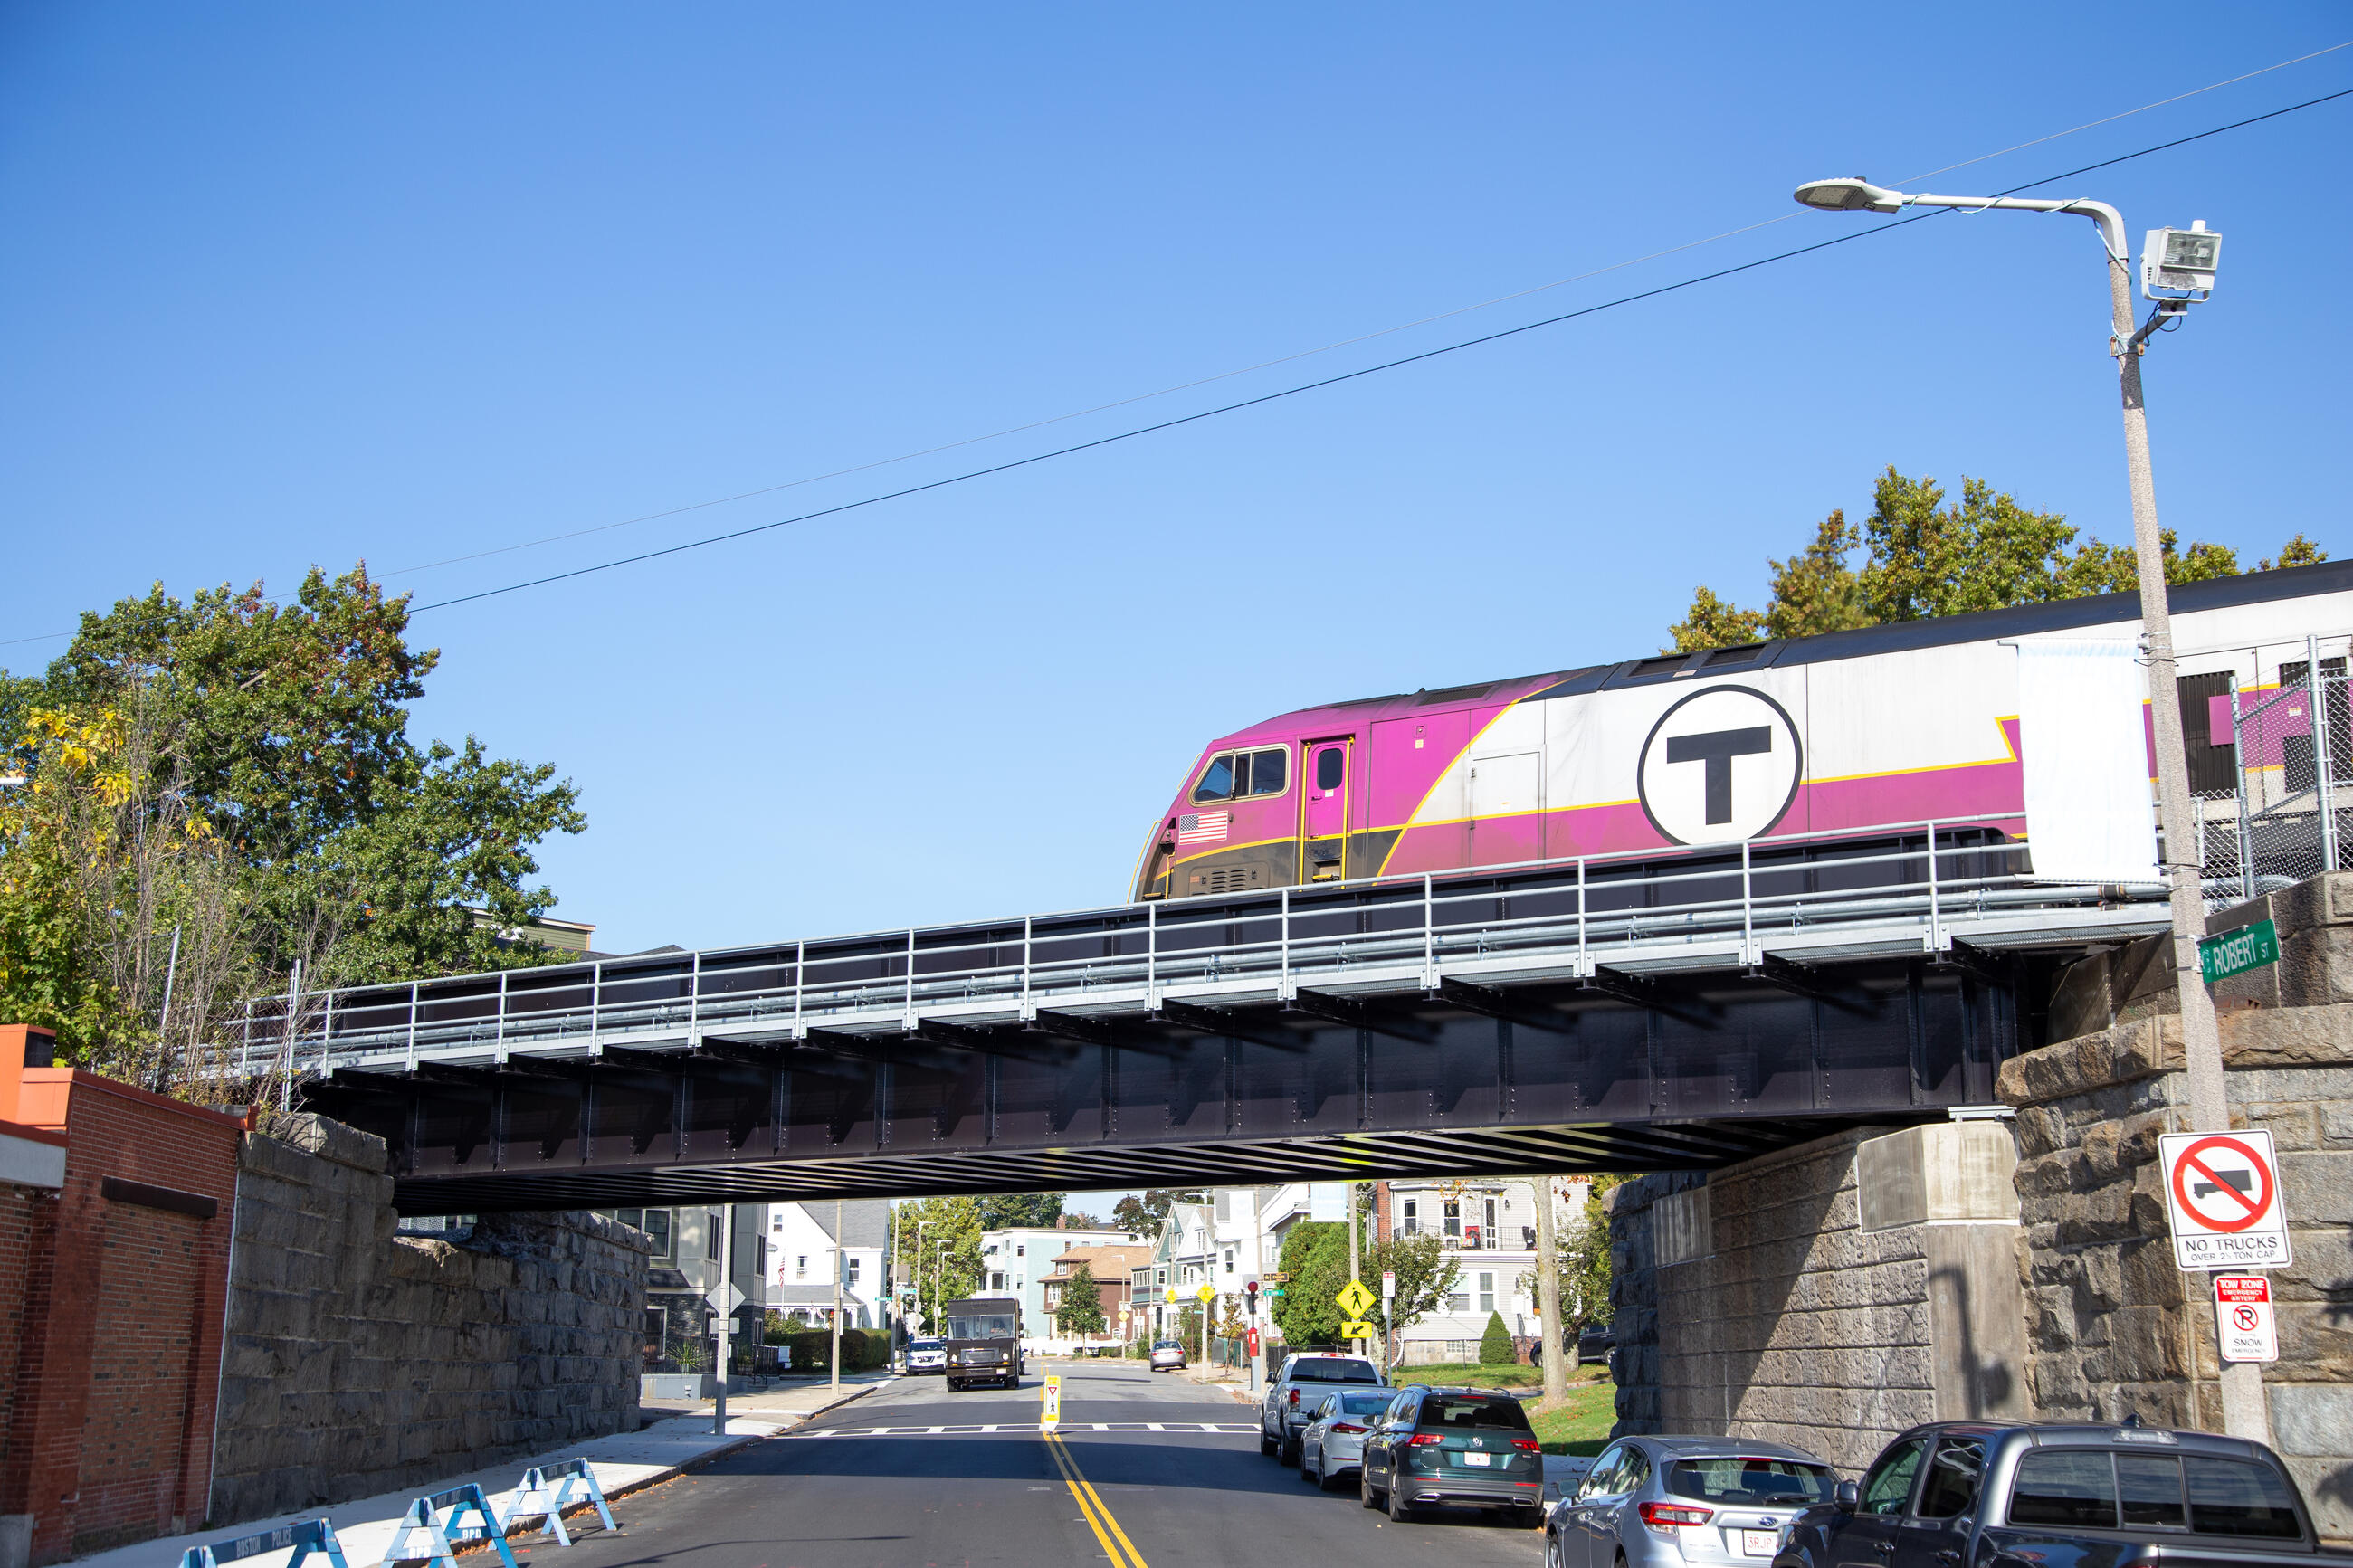 A Needham Line Commuter Rail train crosses the new Robert Street Bridge on a sunny day. A line of cars is parked under the bridge on Robert Street.